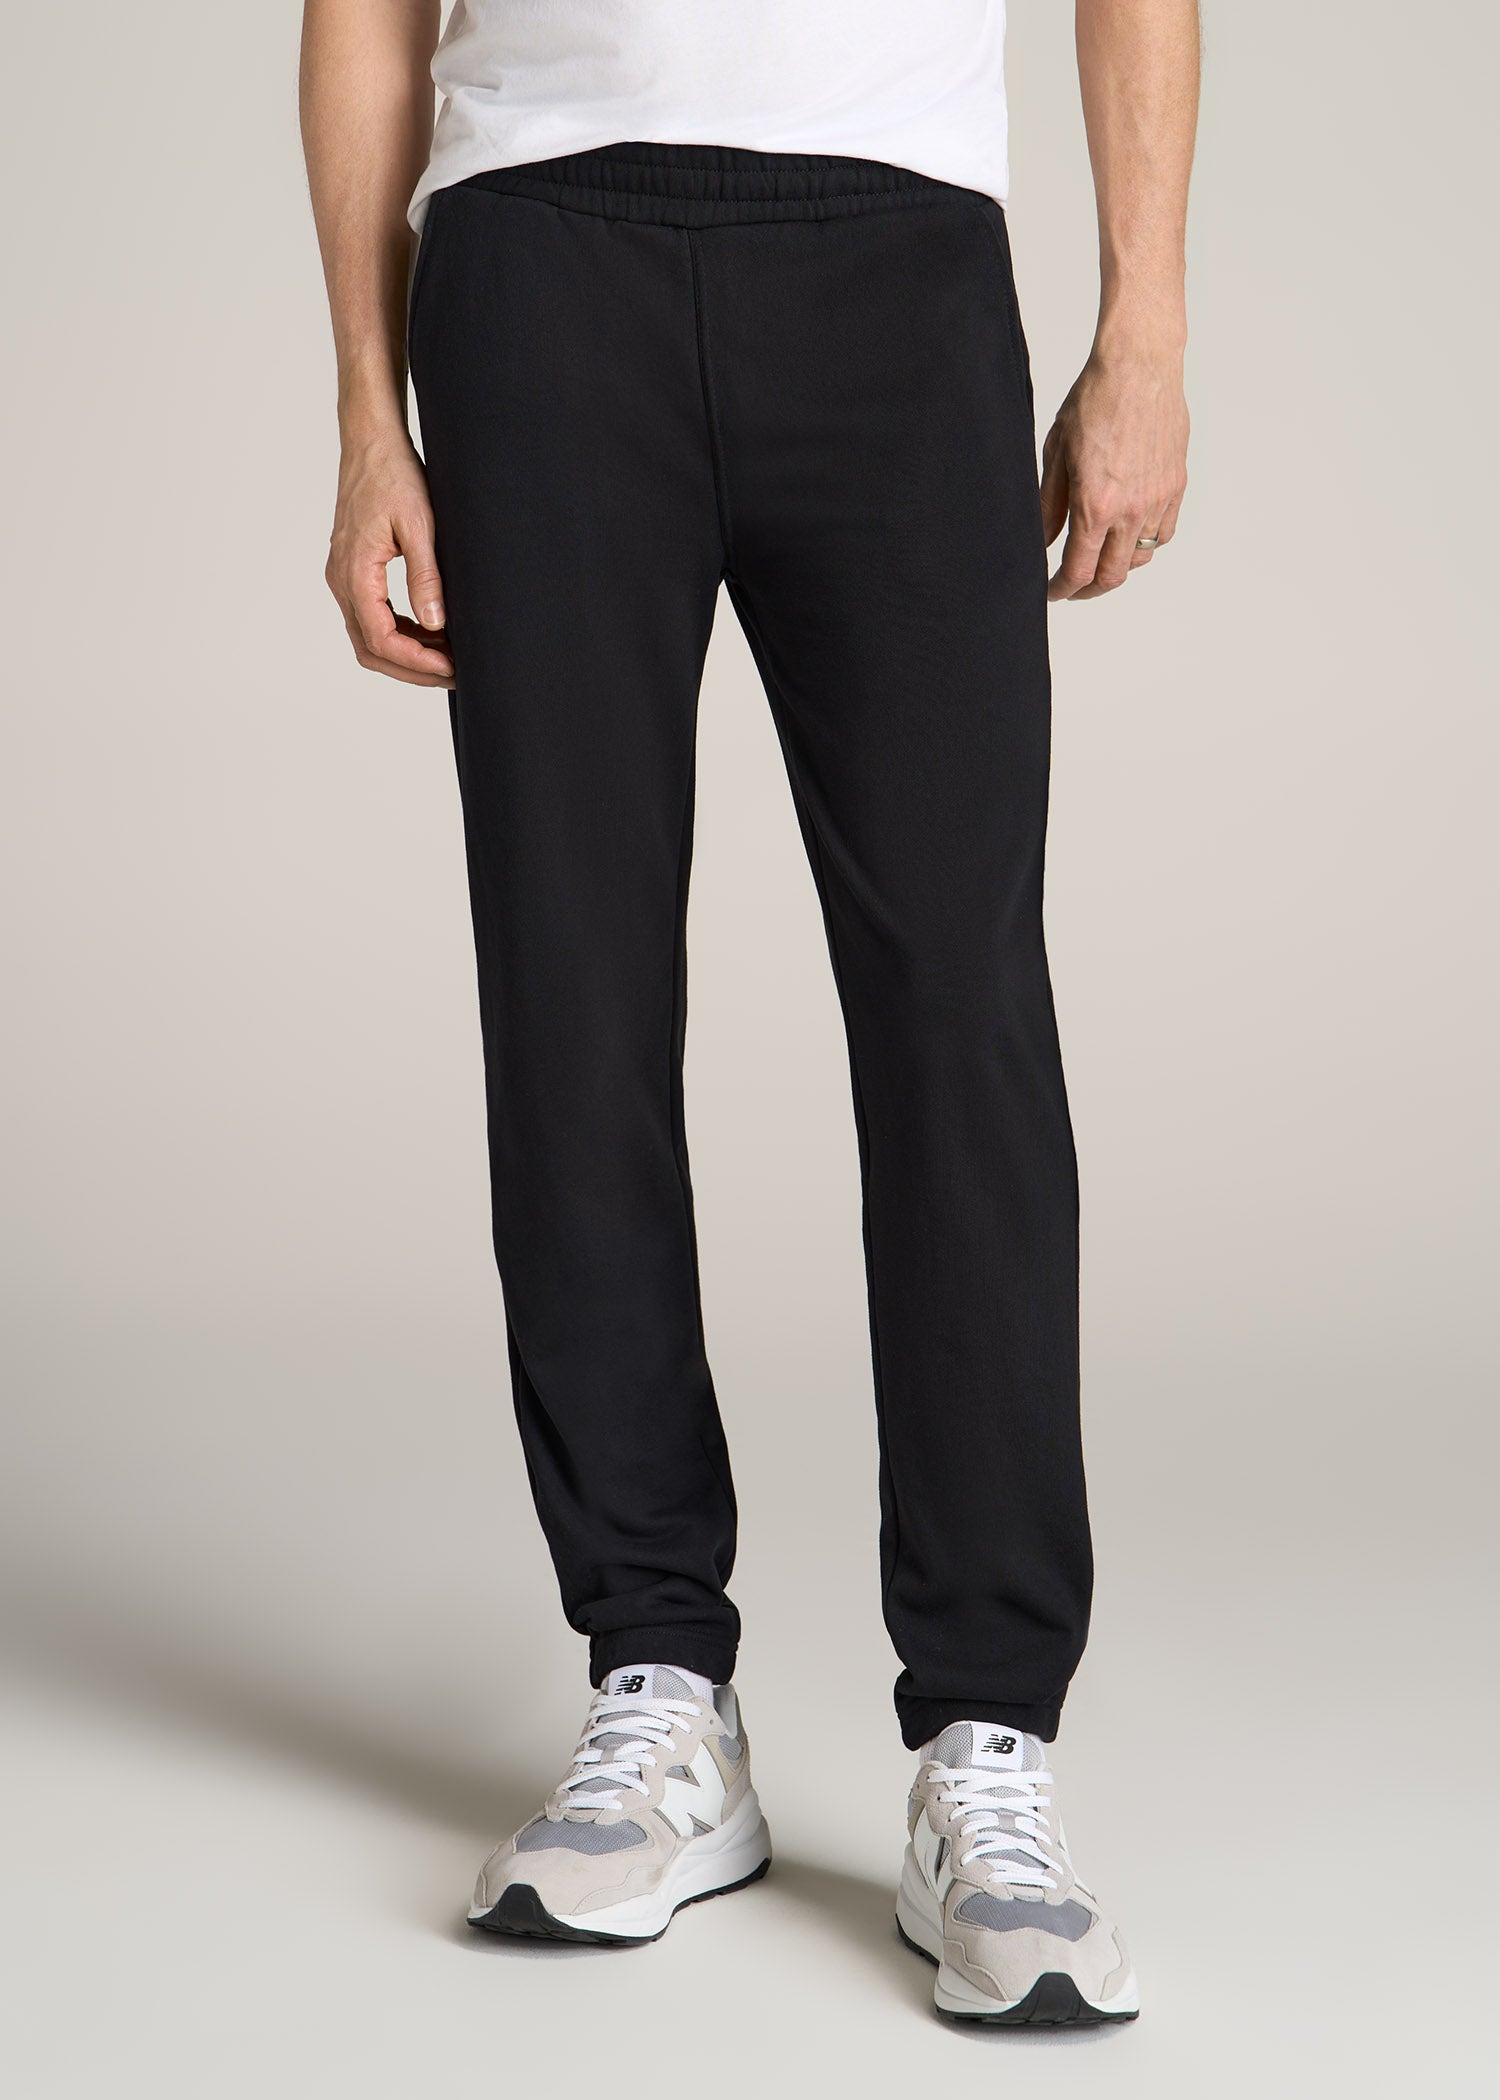 Wearever French Terry Sweatpants for Tall Men in Black